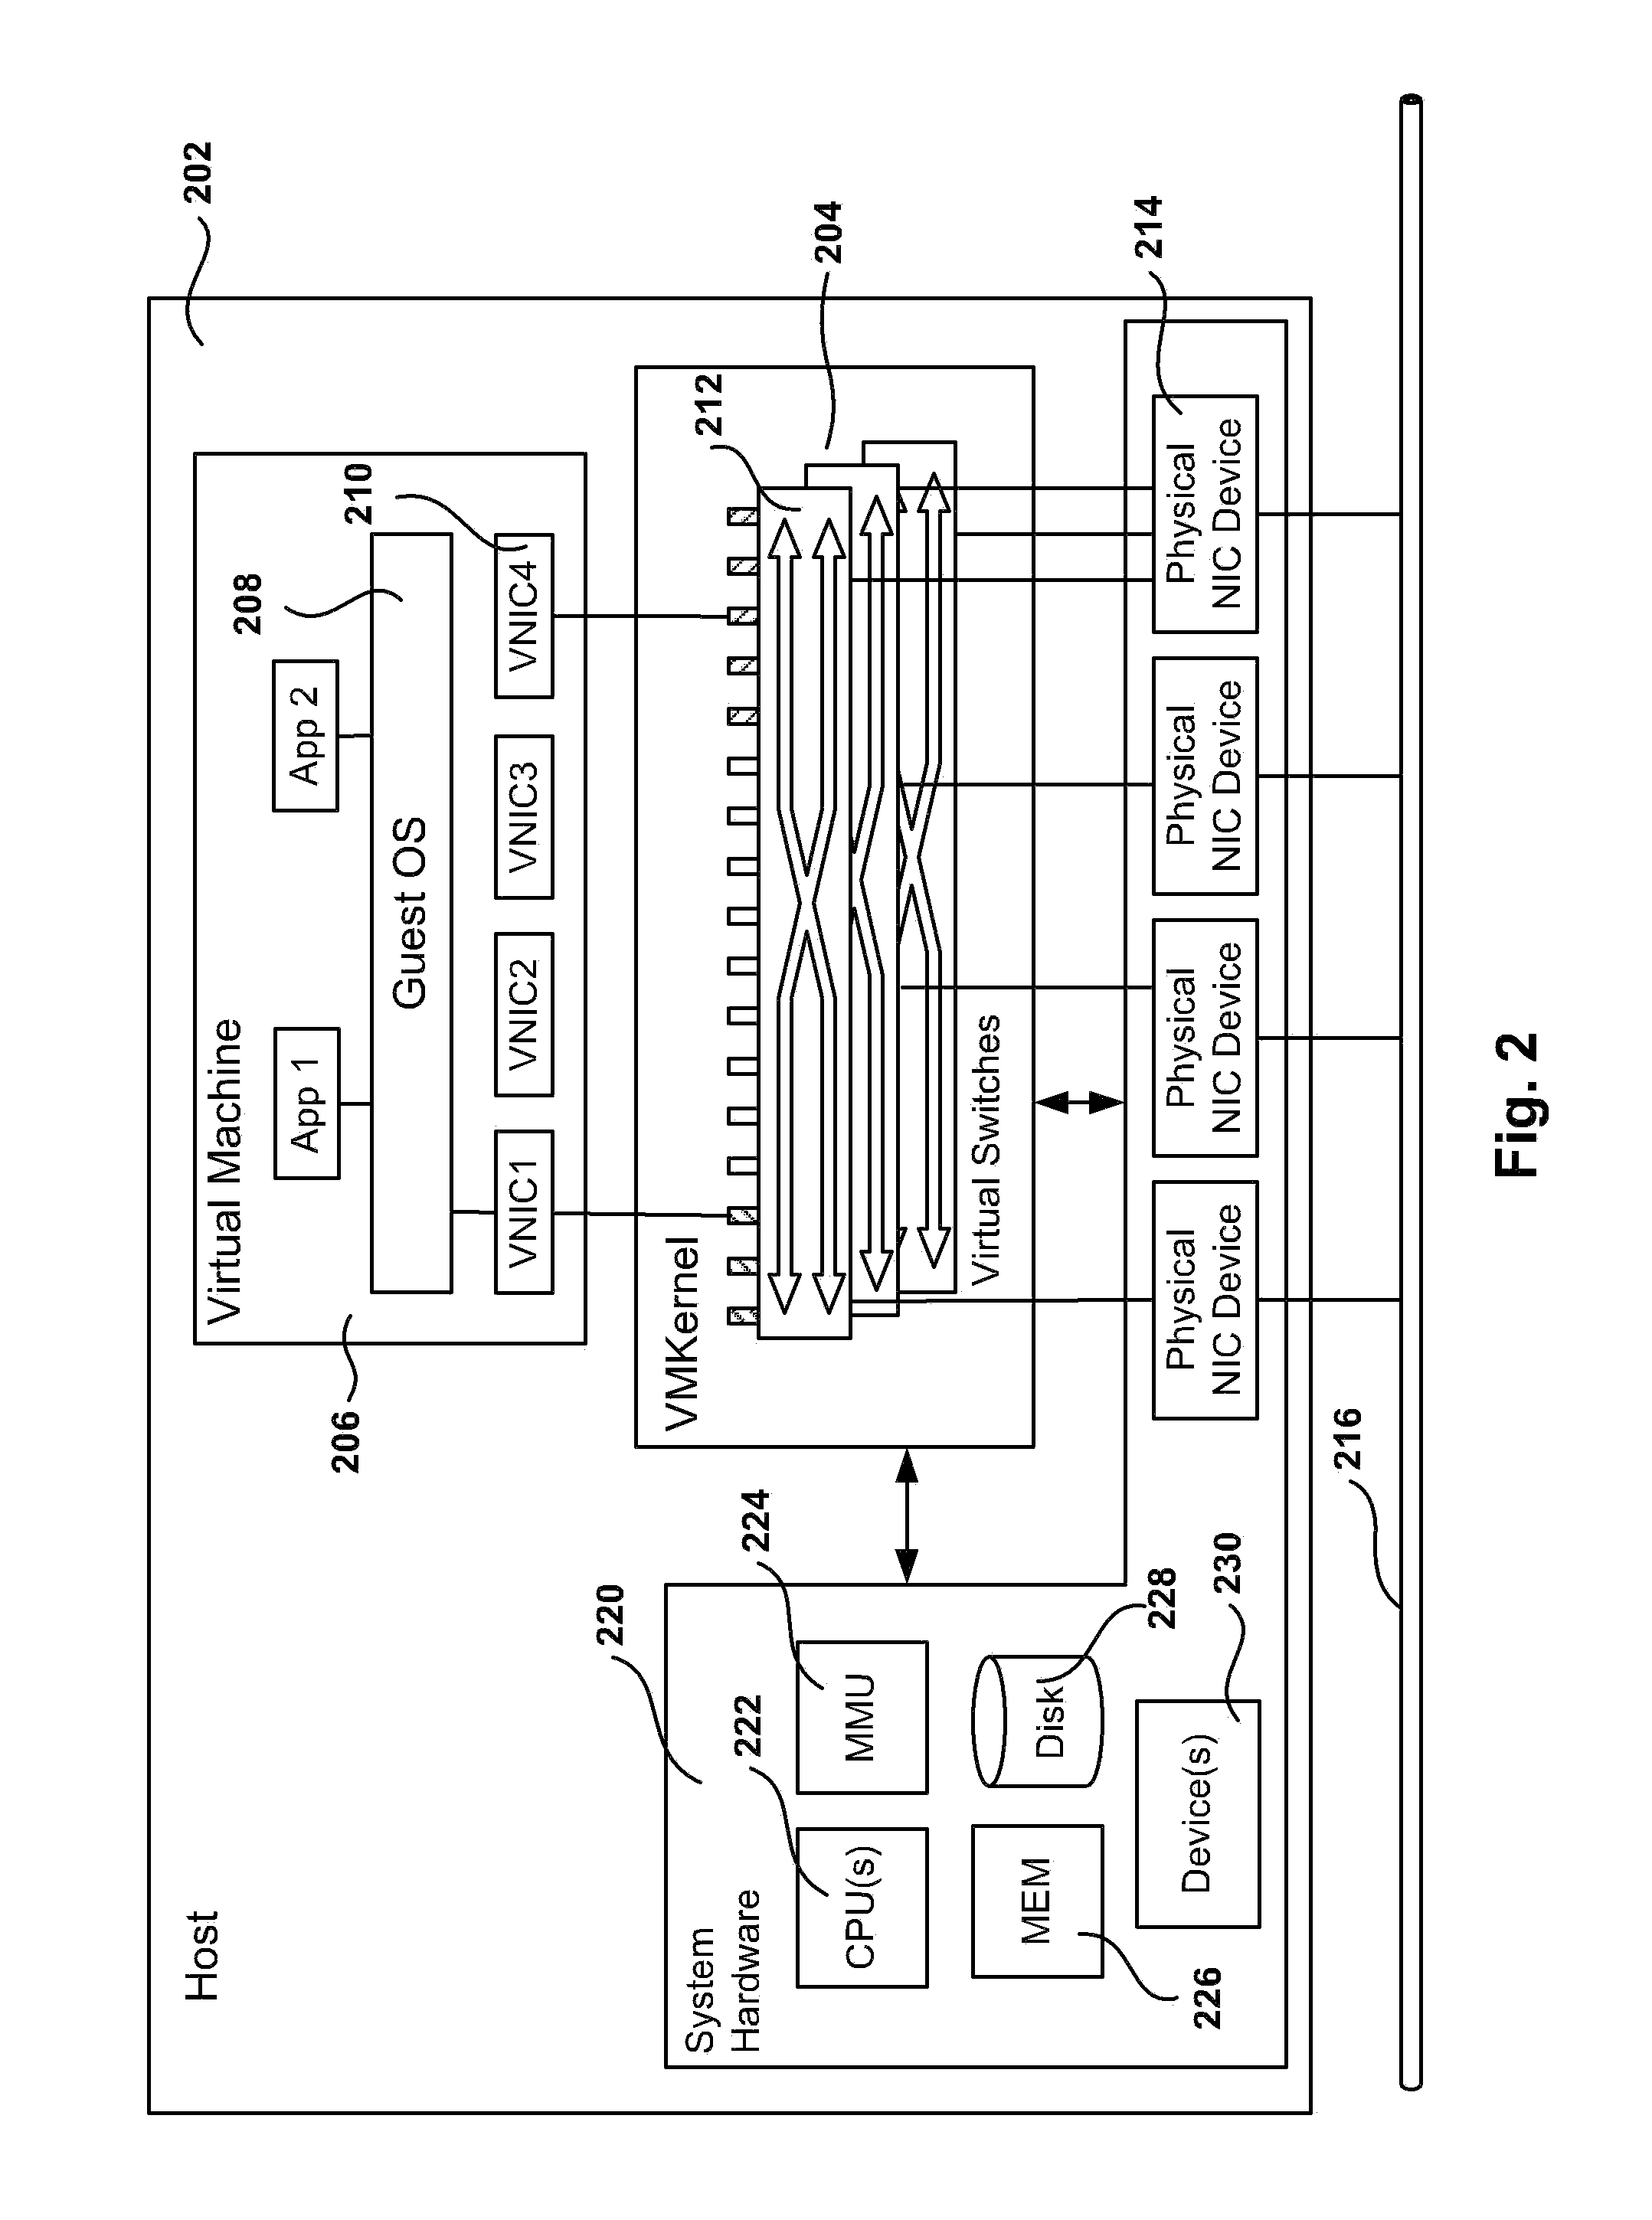 Private ethernet overlay networks over a shared ethernet in a virtual environment